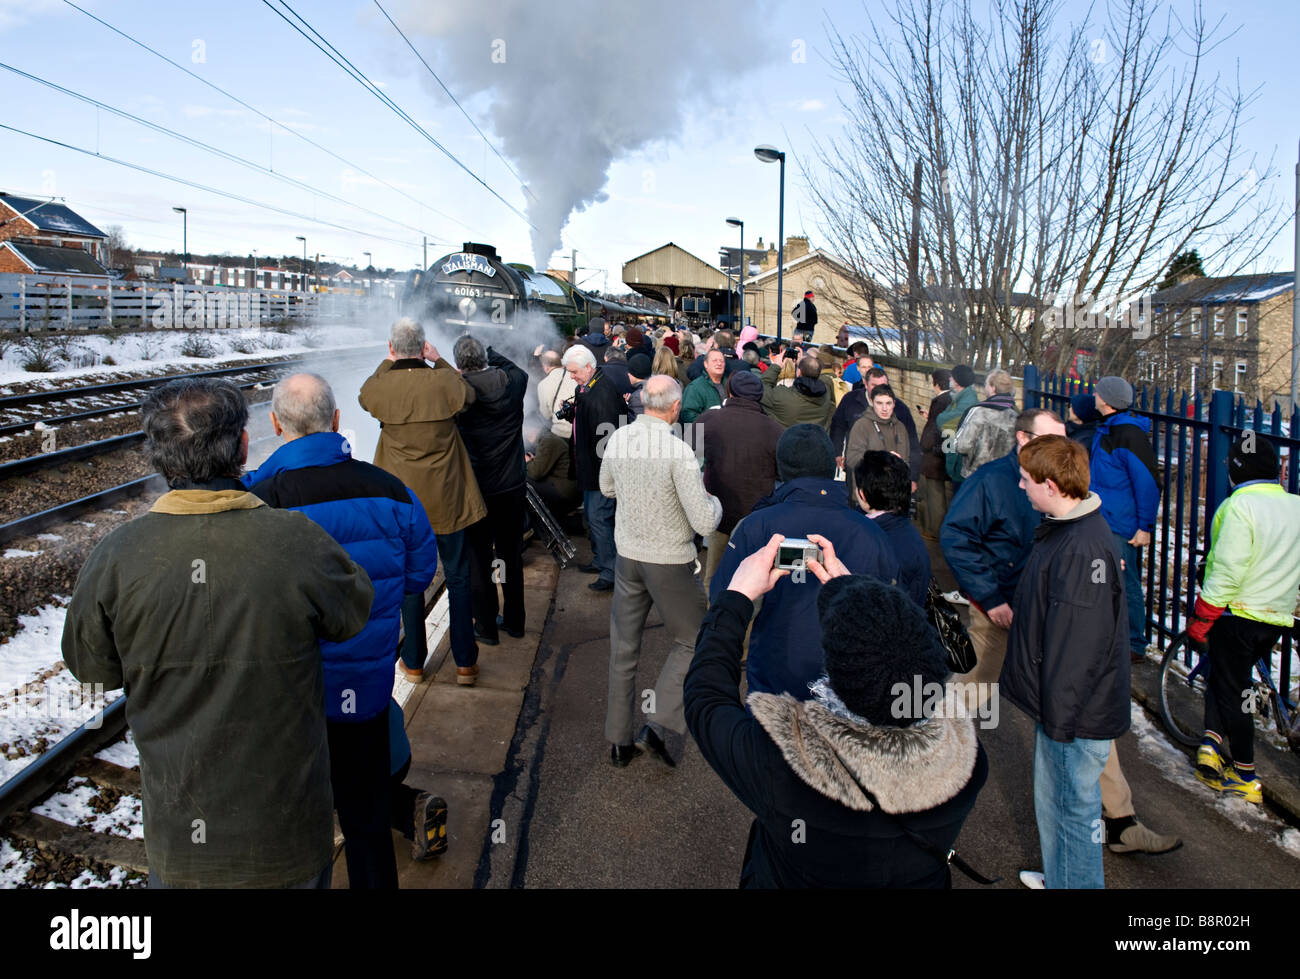 Crowds watch the arrival of A1 'Tornado' on 'The Talisman' at Retford Stock Photo